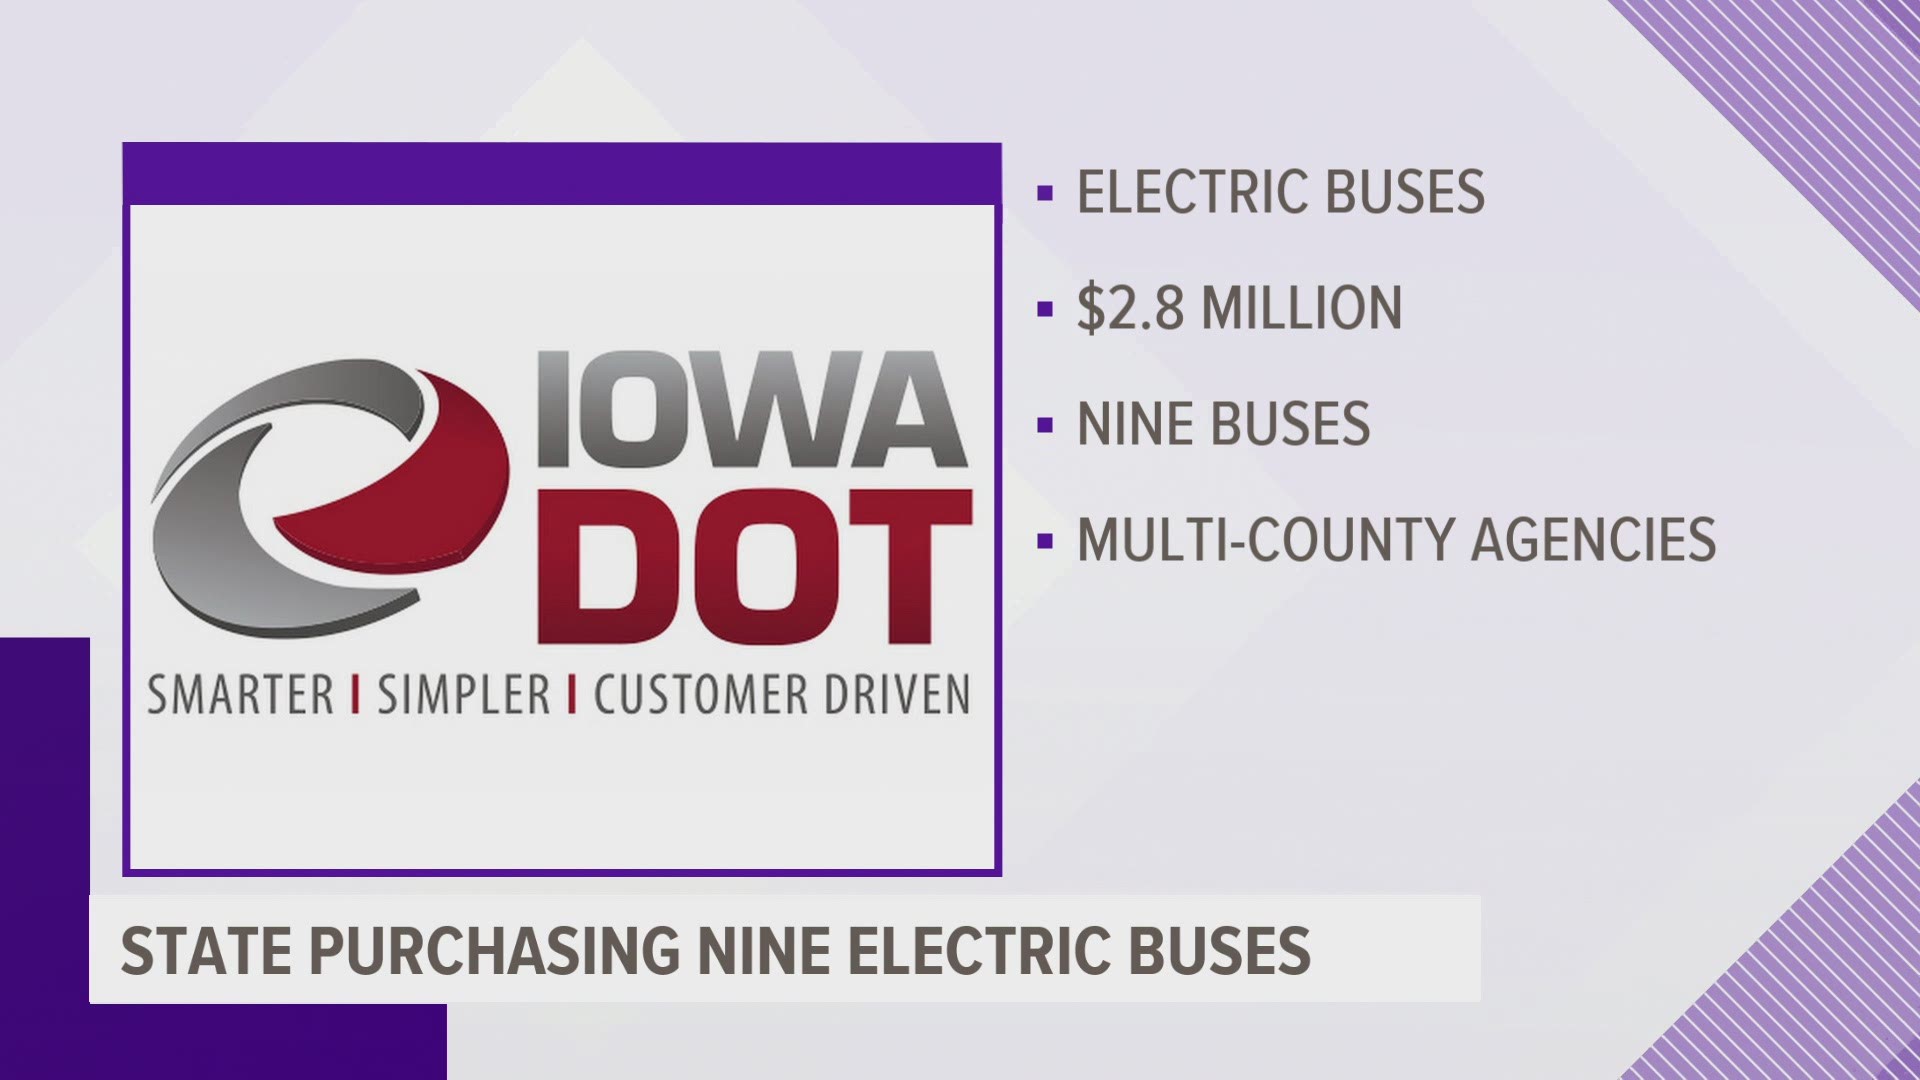 The Iowa Department of Transportation says the buses will be operated across three multi-county transit systems in southeast Iowa.